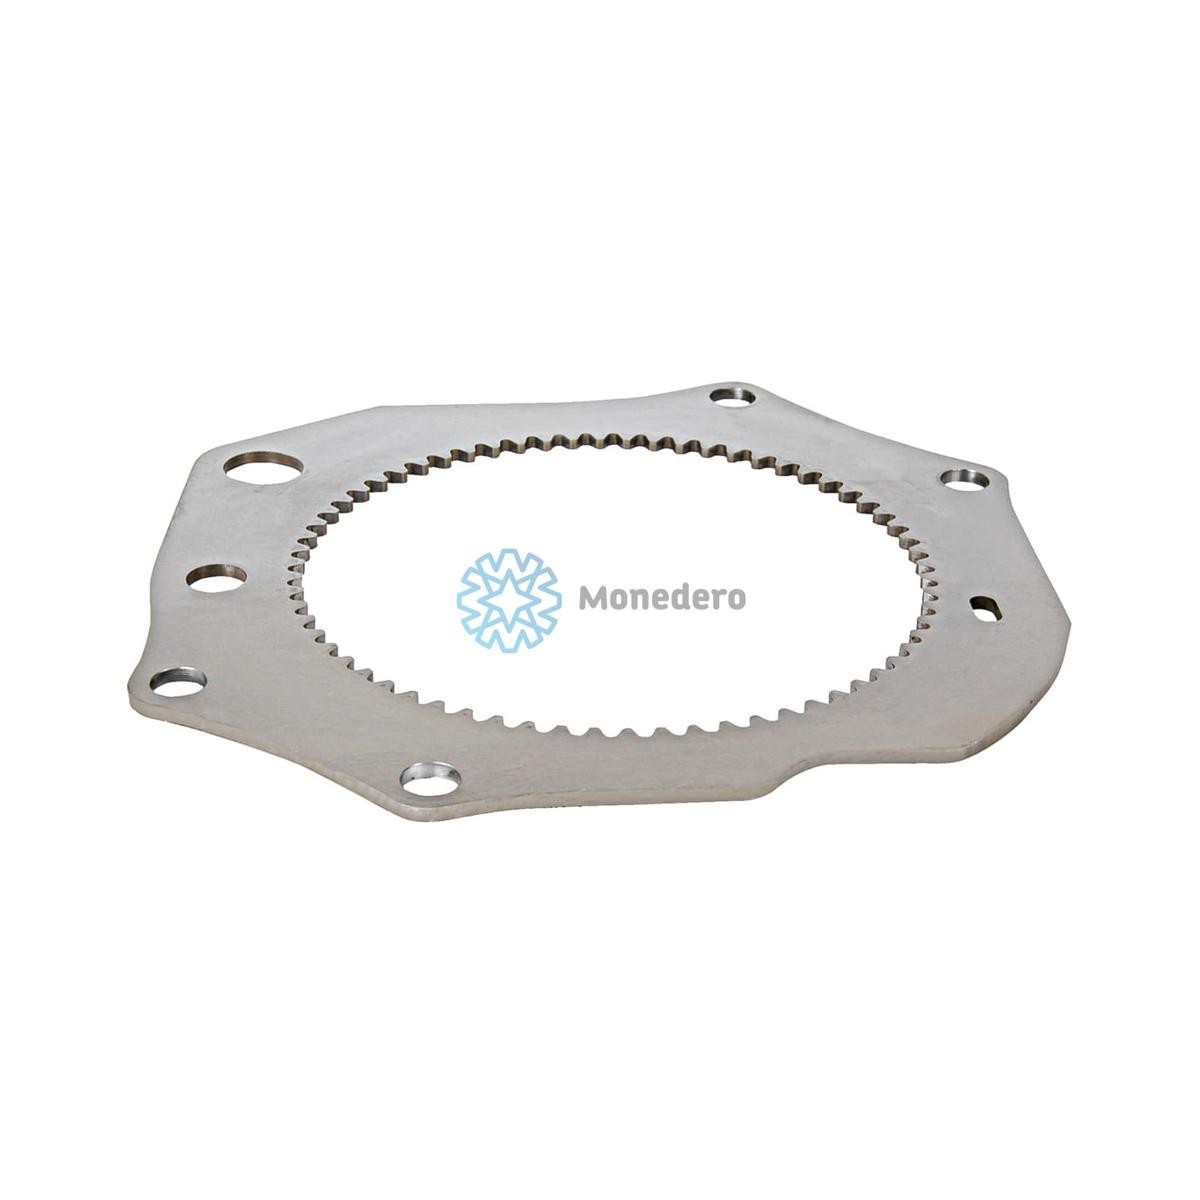 Original 40029000020 MONEDERO Performance clutch experience and price